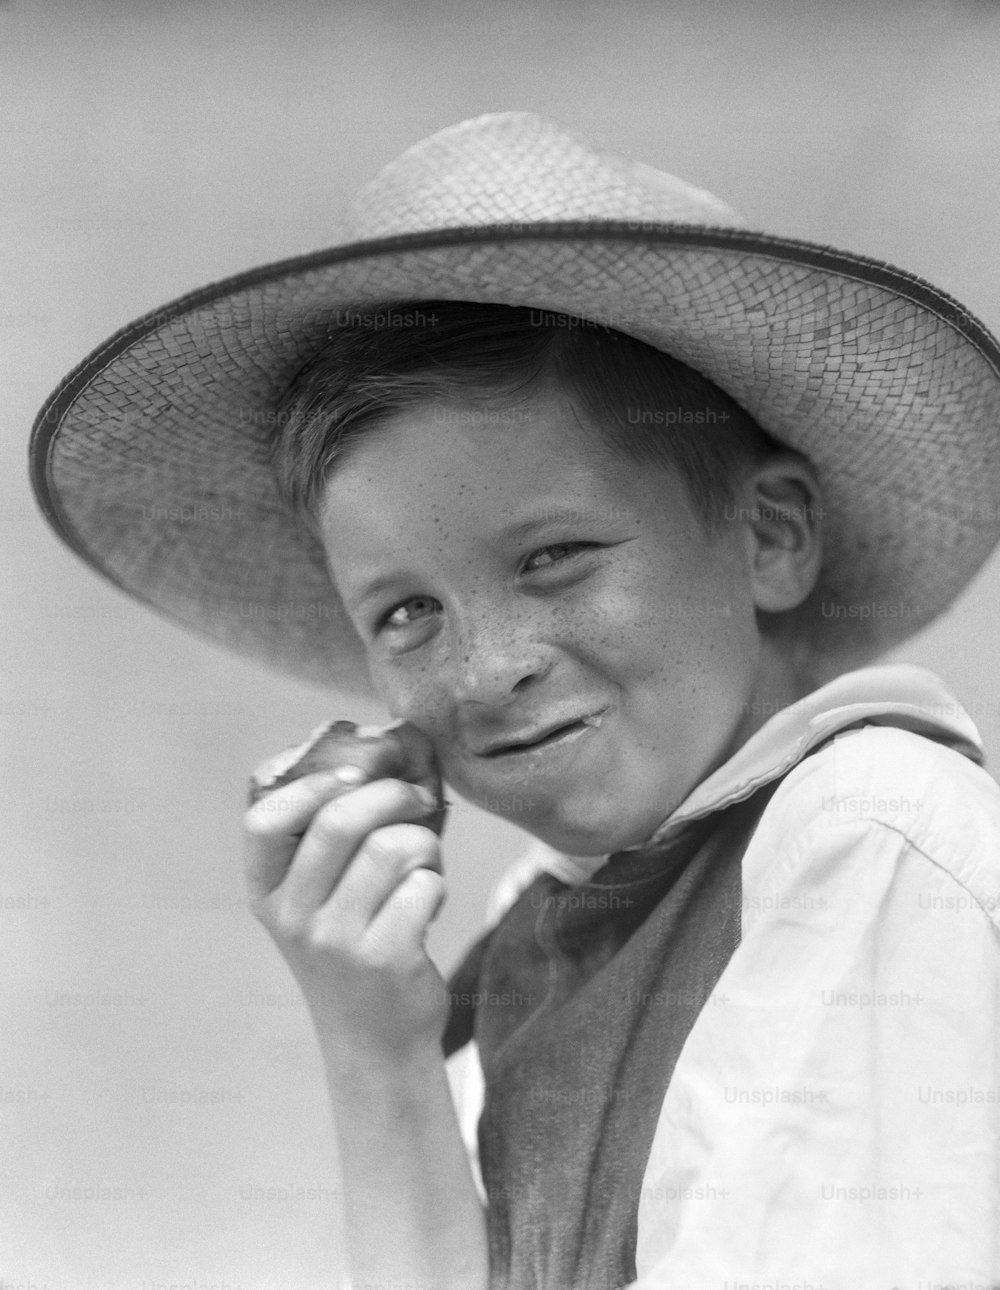 UNITED STATES - CIRCA 1930s:  Smiling boy in overalls eating an apple, mouth full.